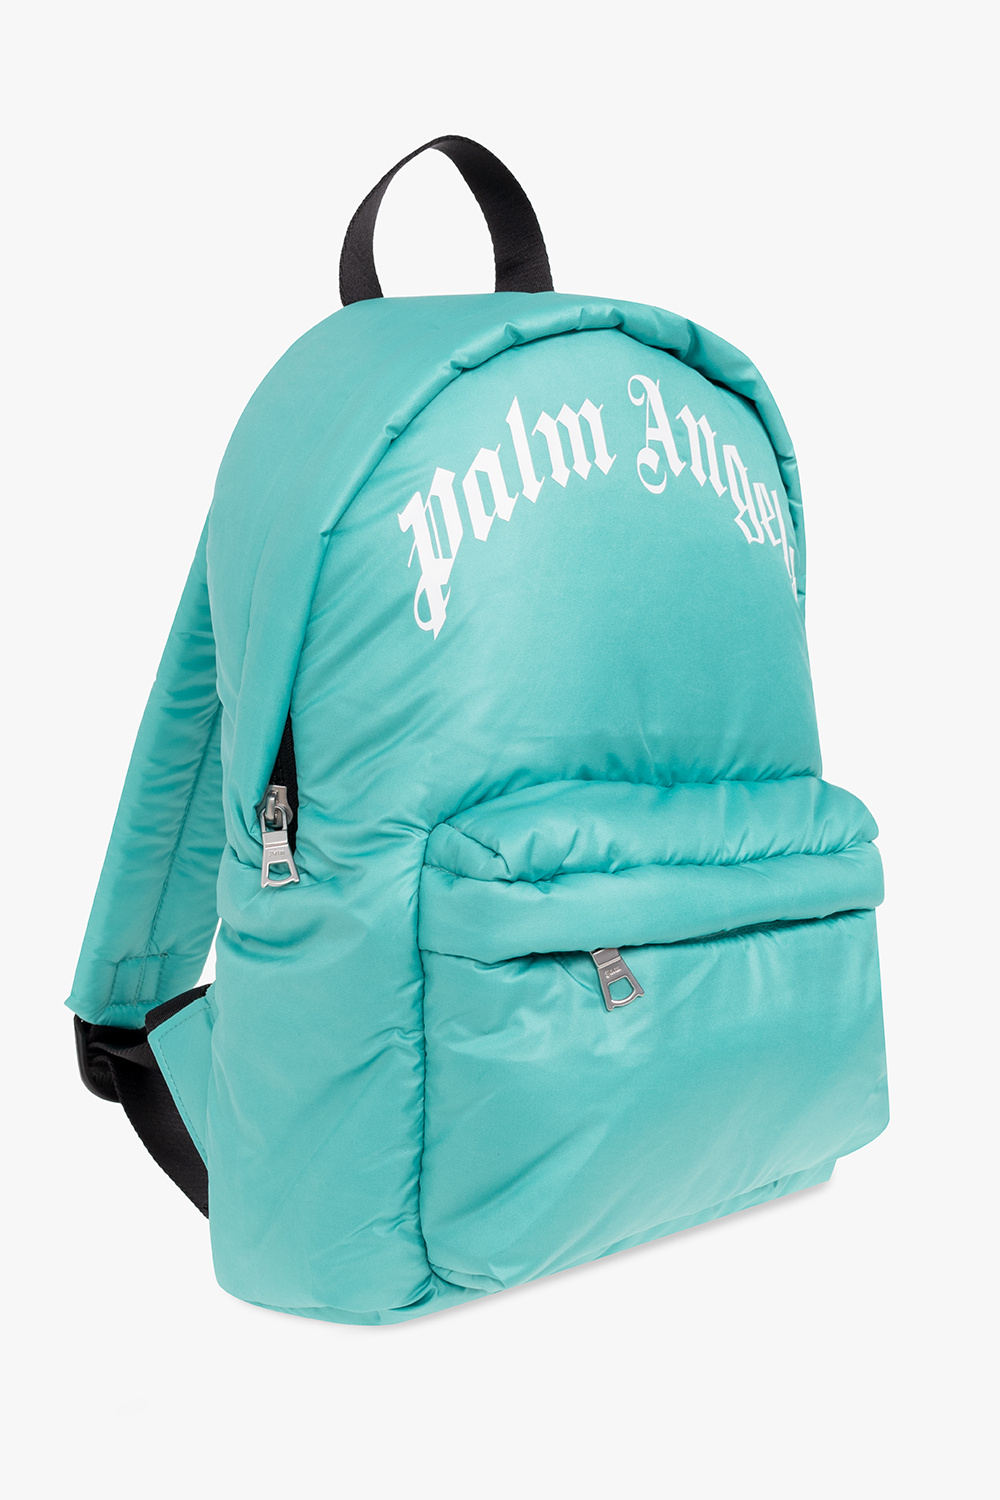 Palm Angels Kids popular with logo